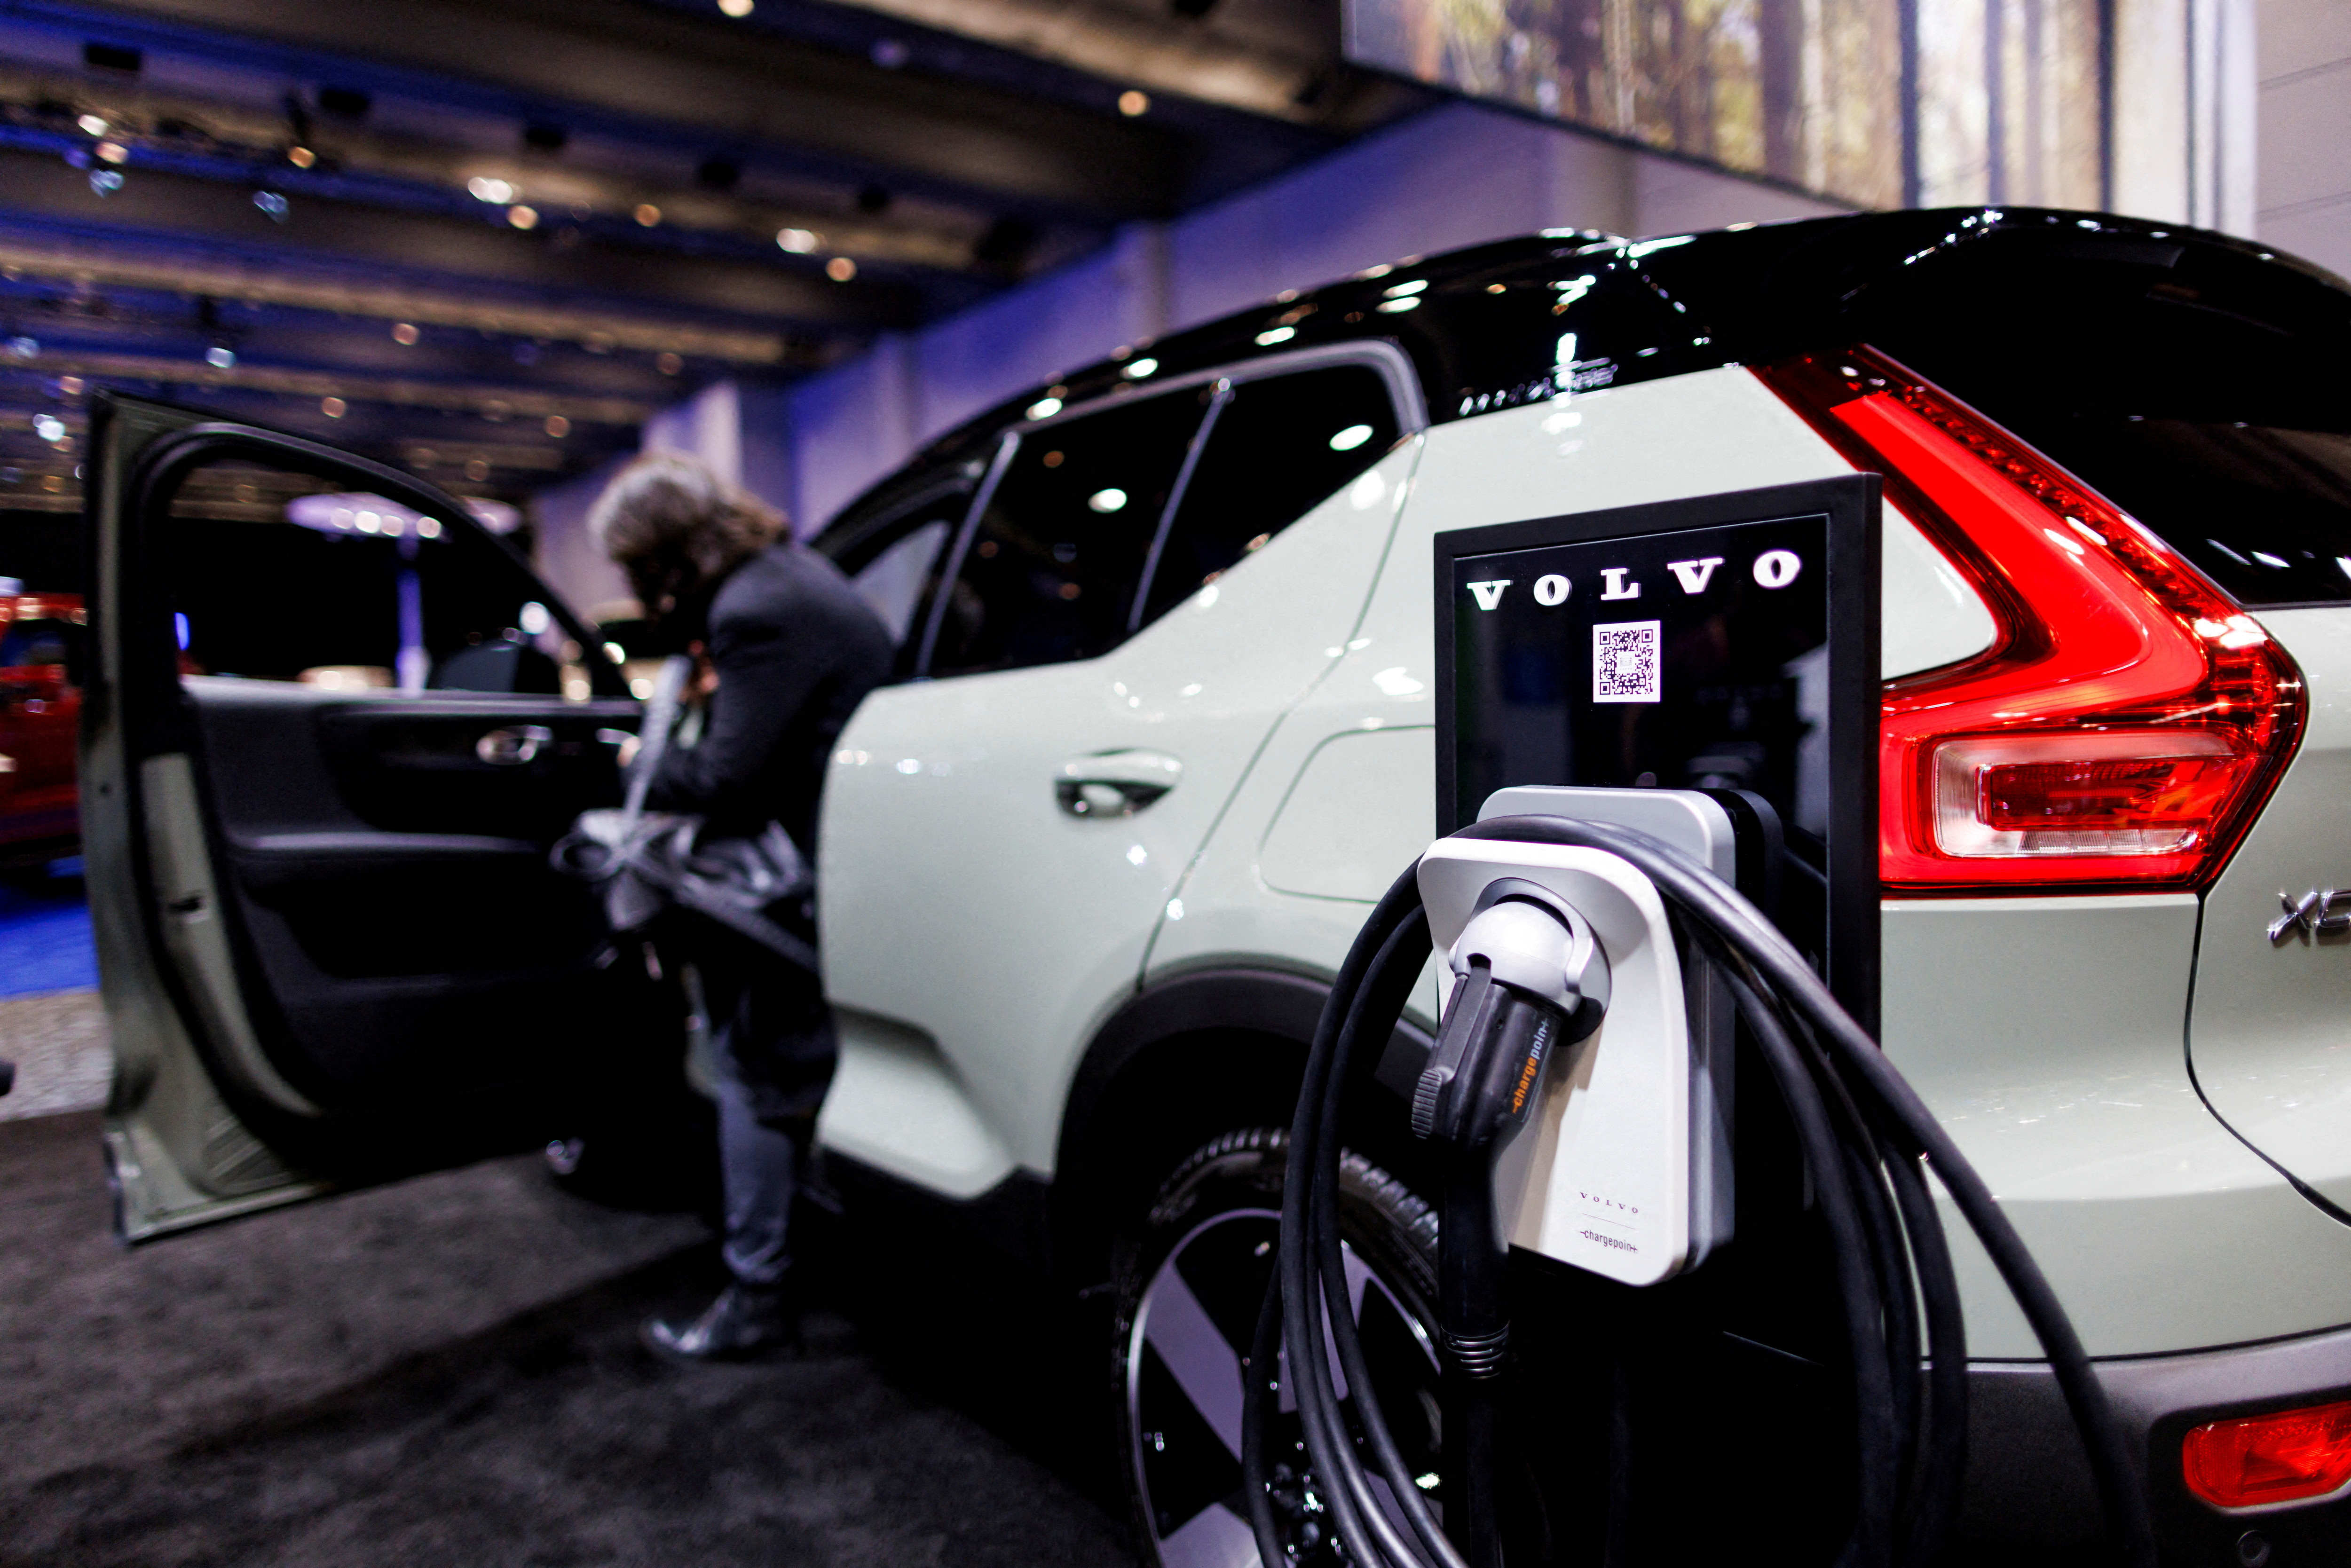 Volvo introduces nano battery project with rechargeable body panels